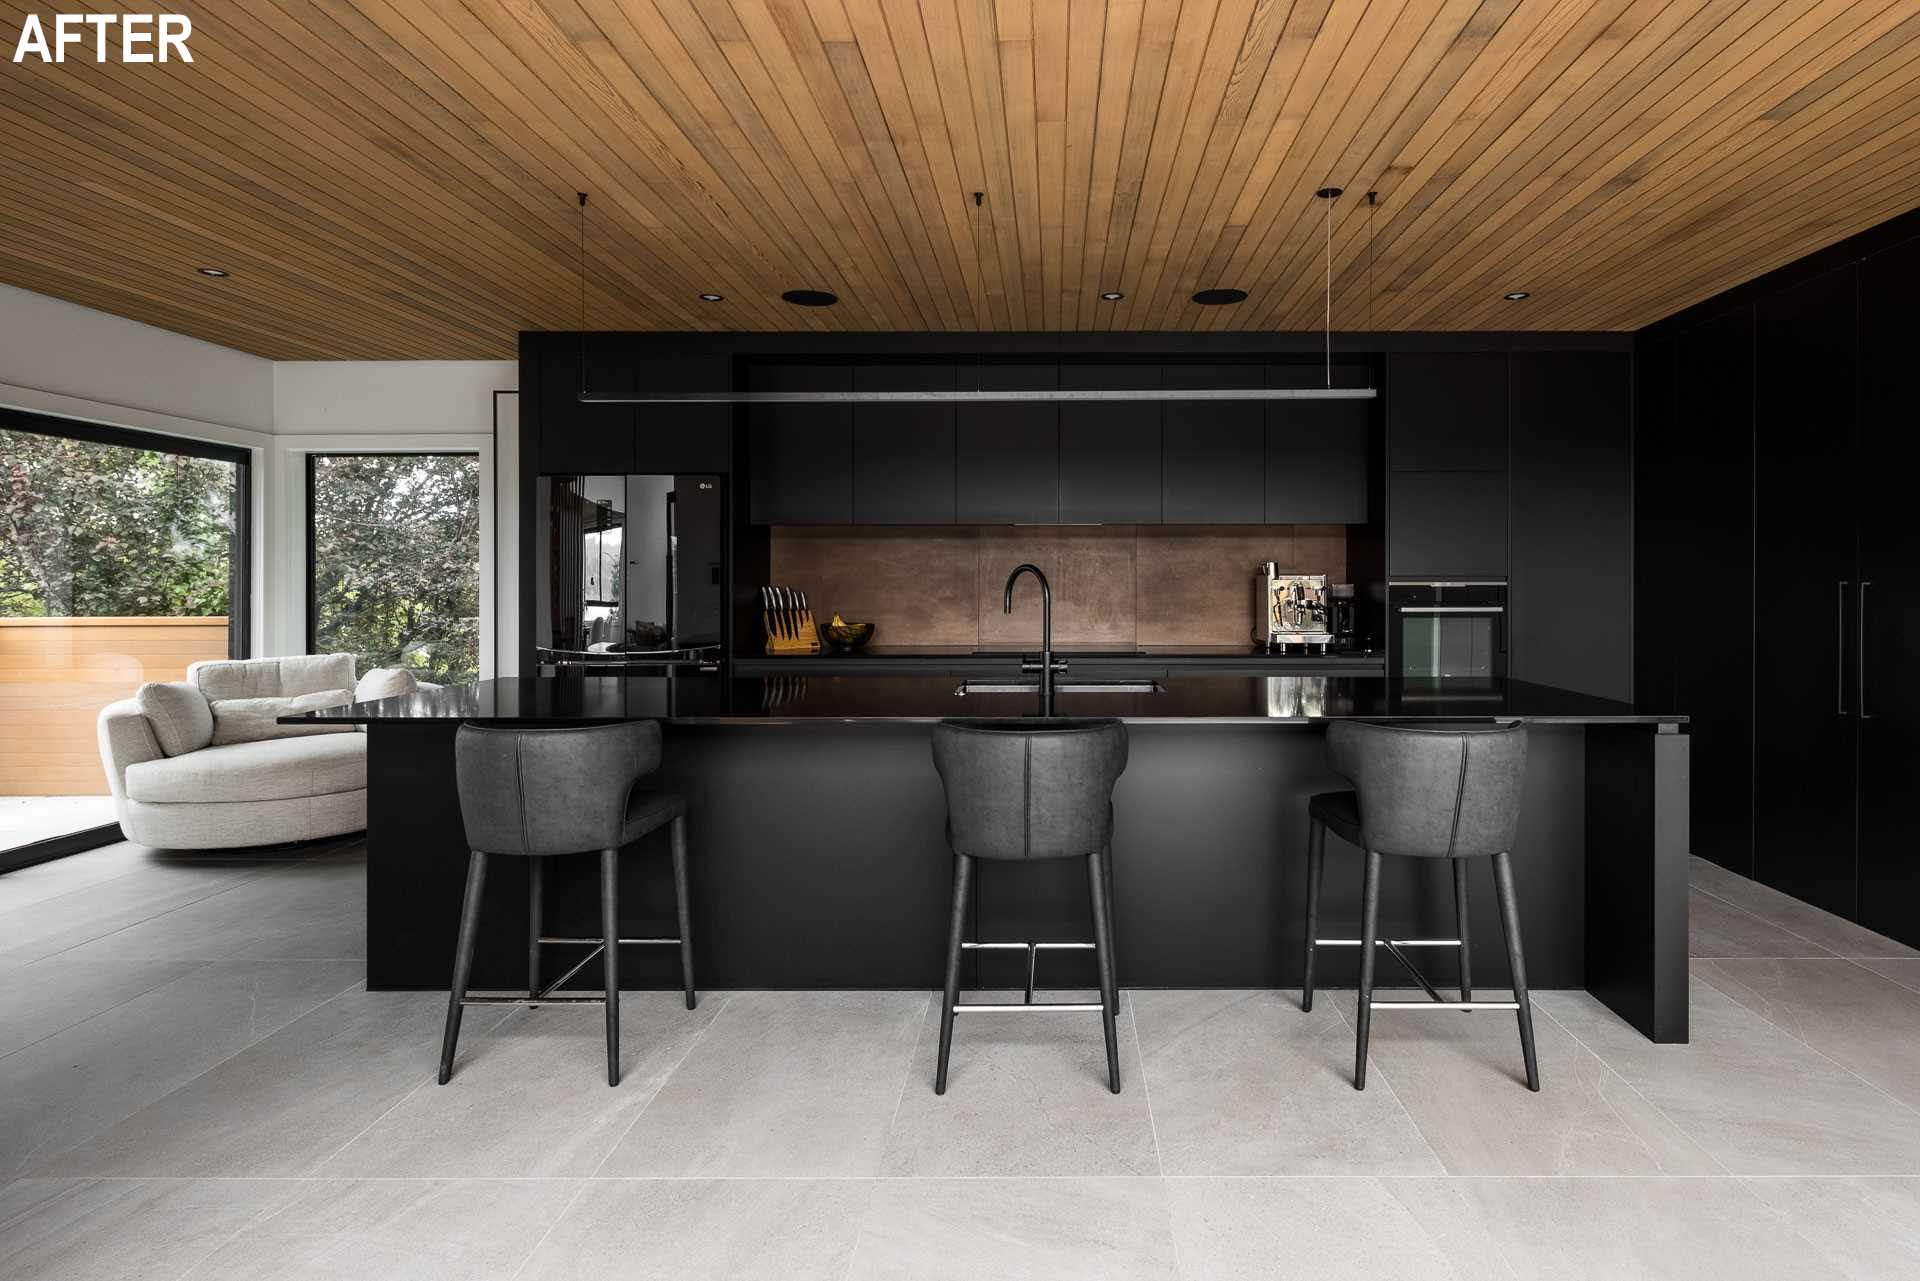 A modern black kitchen with minimalist cabinets, a long island, and a wood ceiling.